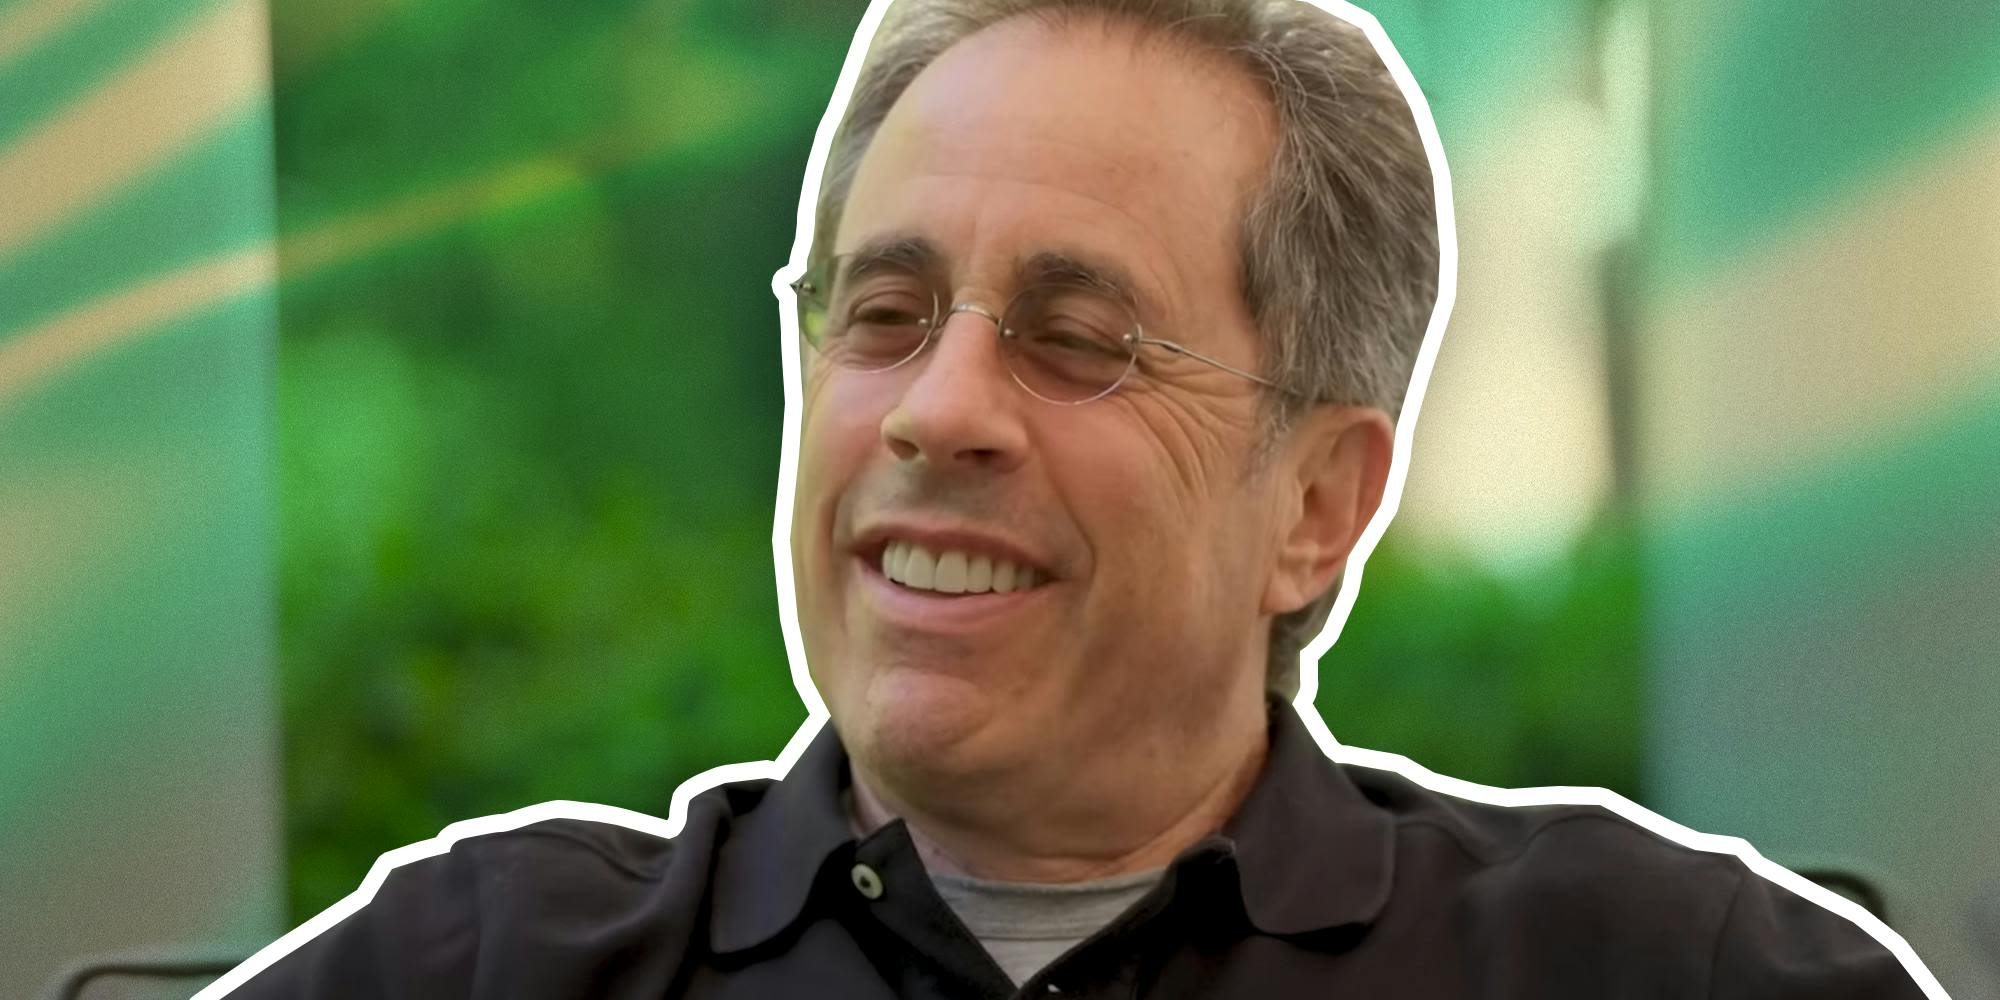 ‘I like a real man’: The Internet reacts to Jerry Seinfeld’s baffling opinion on masculinity